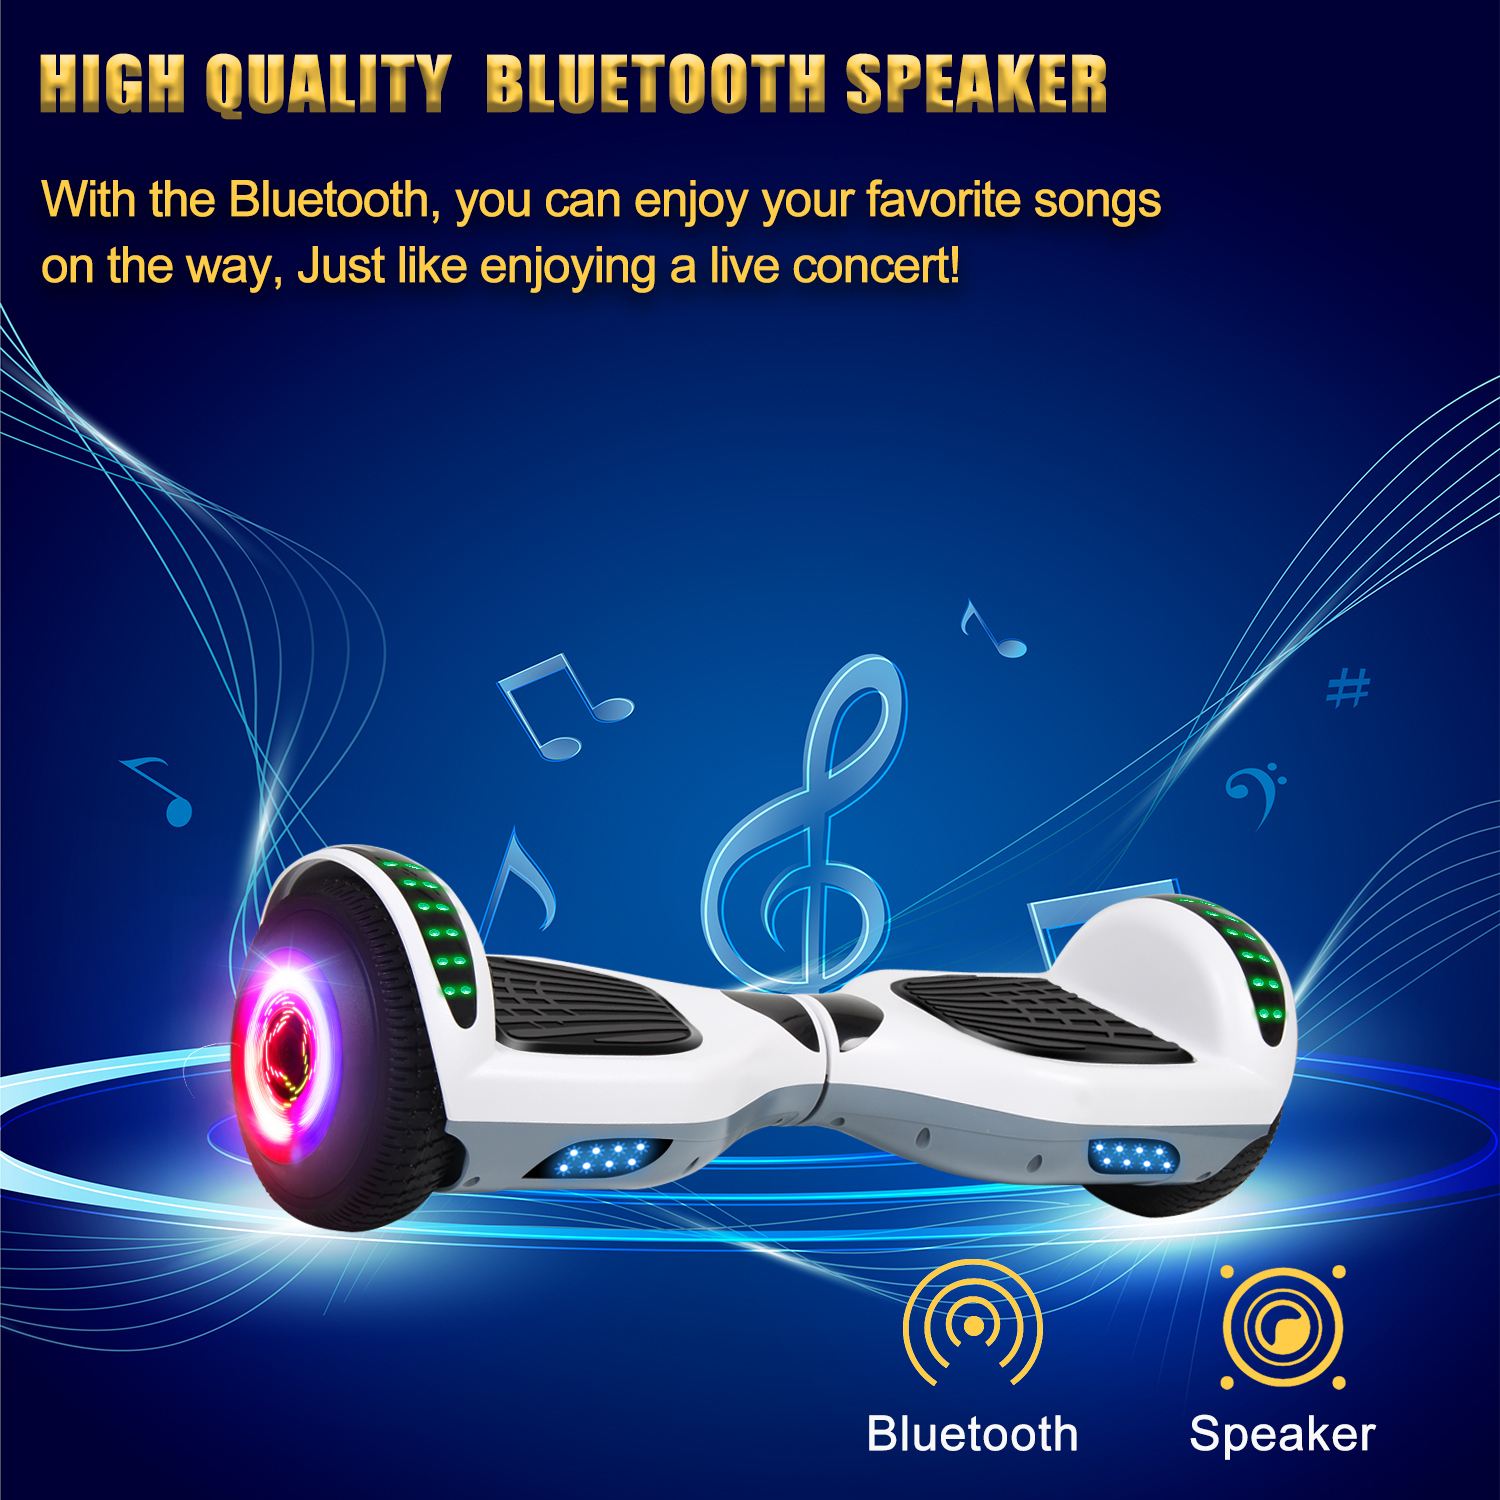 CBD Hoverboard 6.5 inch Self Balancing Hoverboard with LED Lights and Bluetooth Hoverboard for Adults and Kids Gift White - image 5 of 7